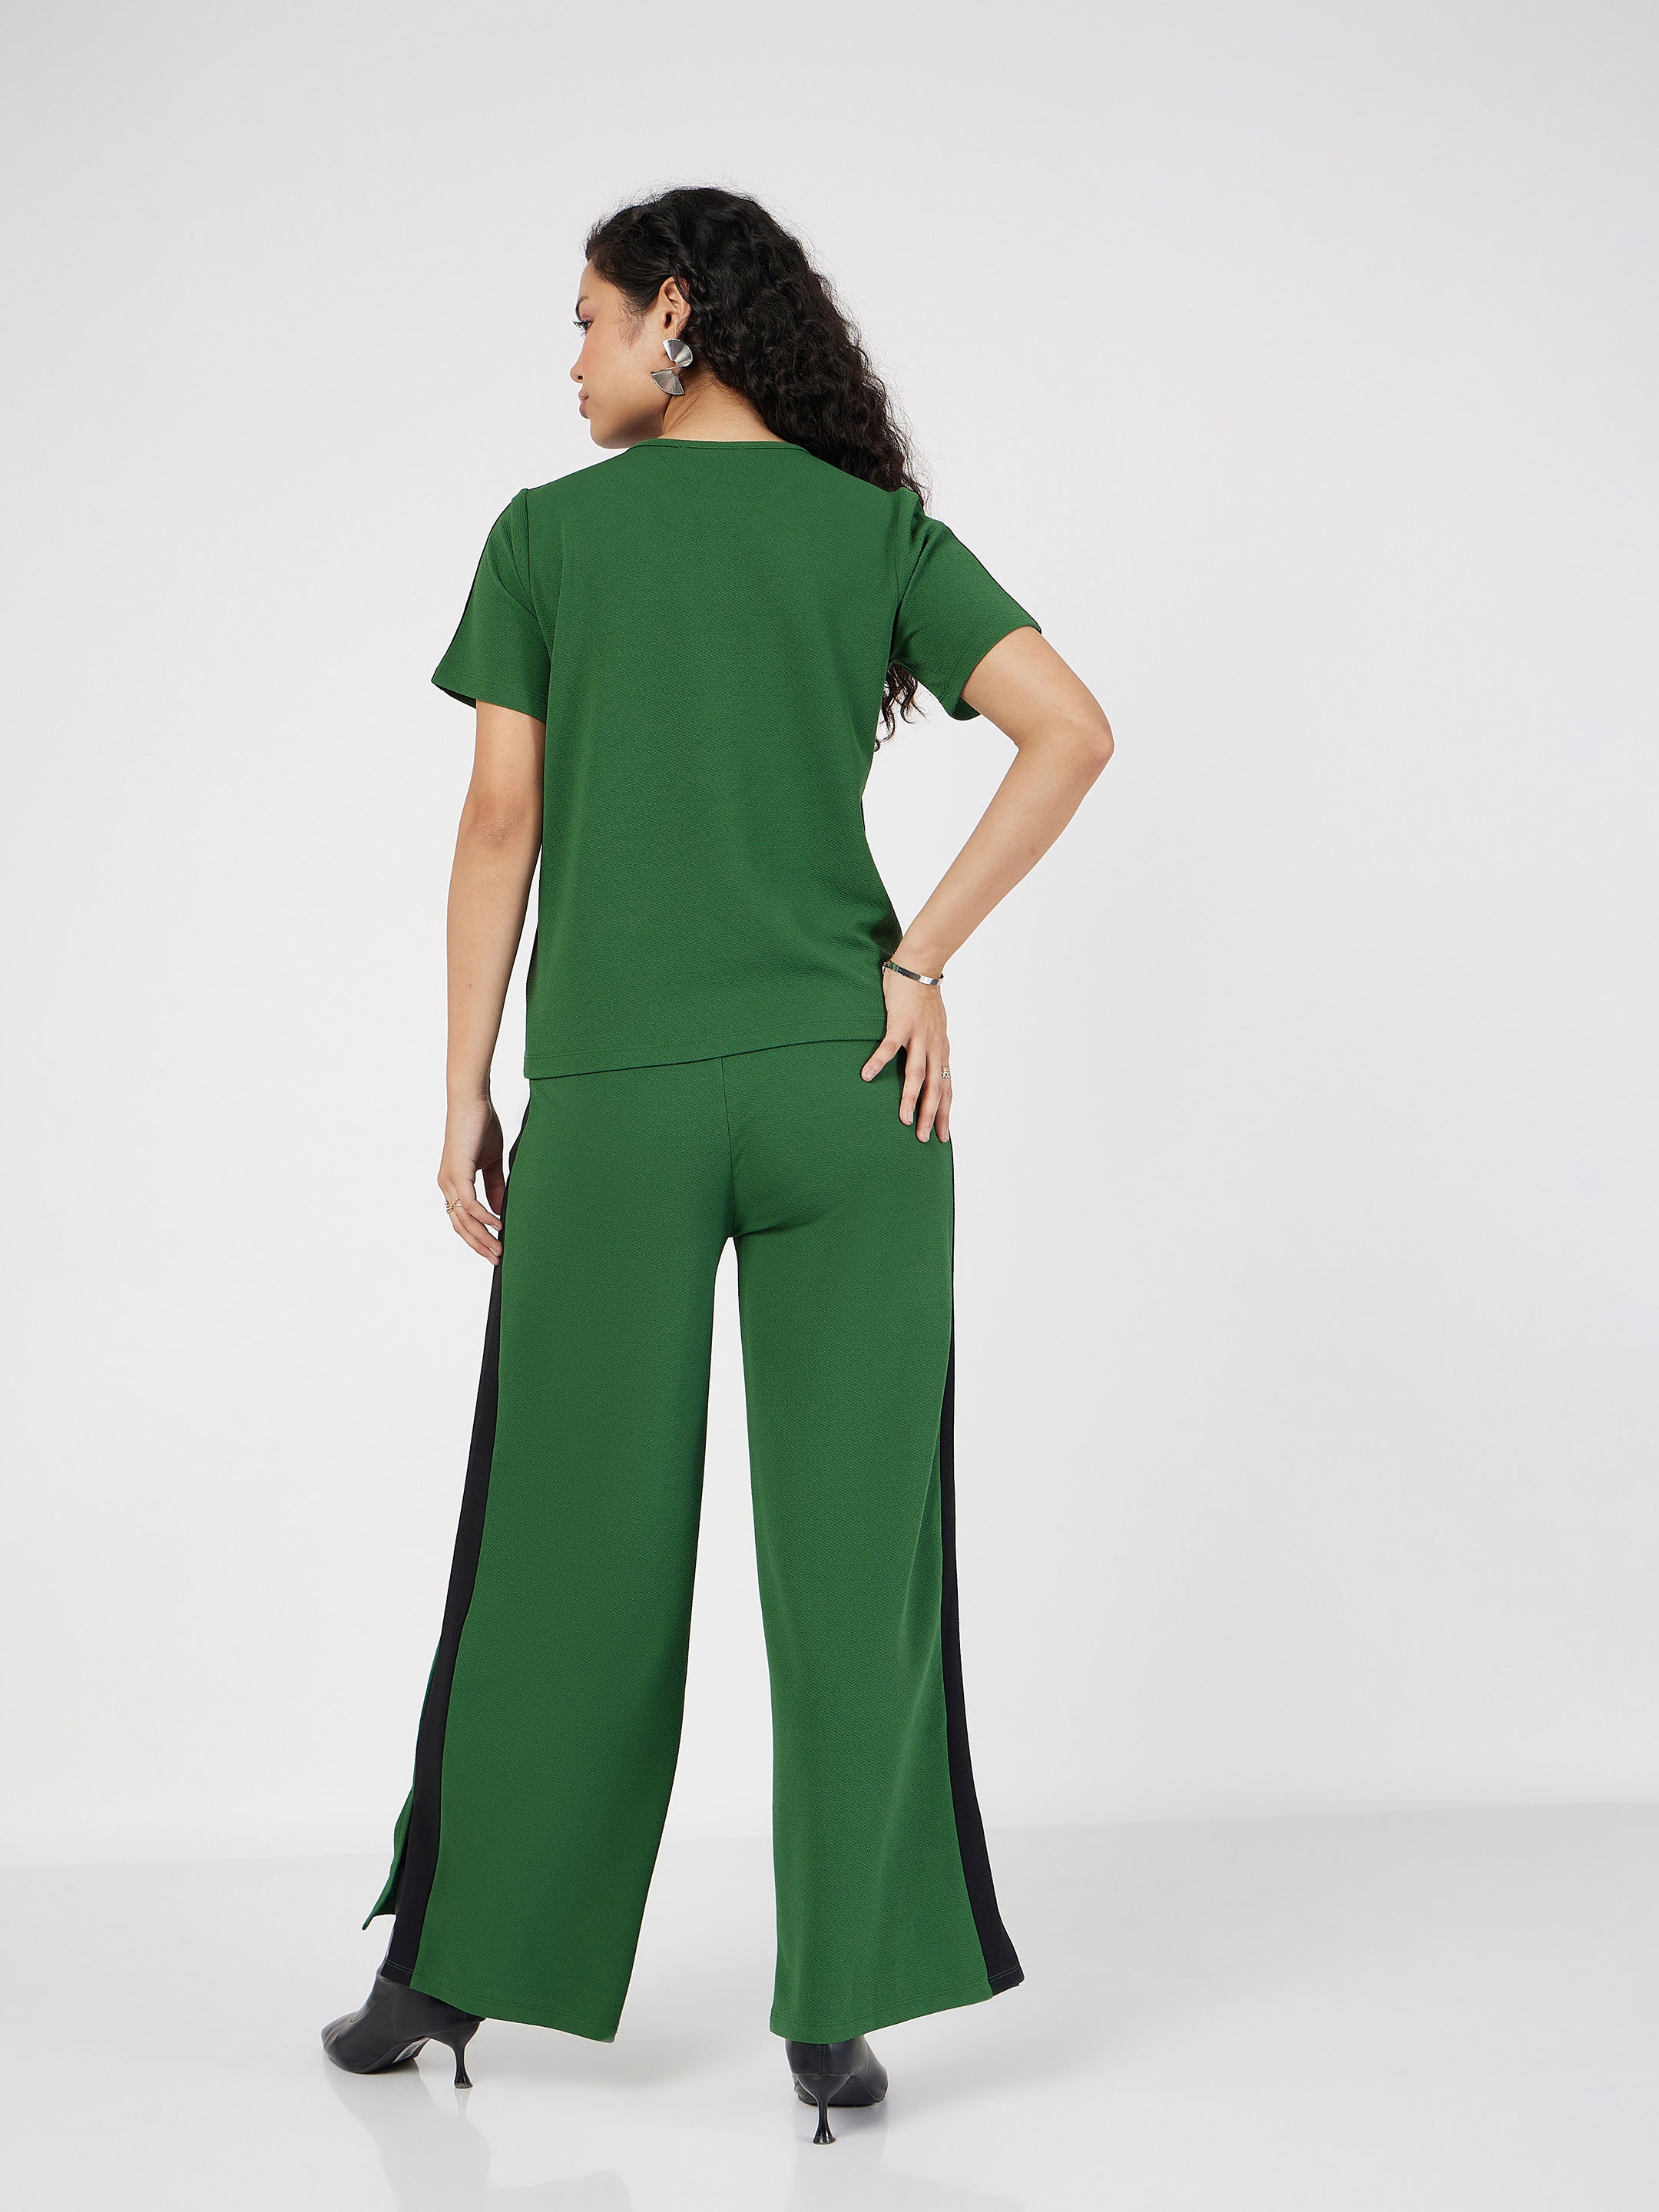 Women's Green Contrast Tape T-Shirt With Track Pants - Lyush